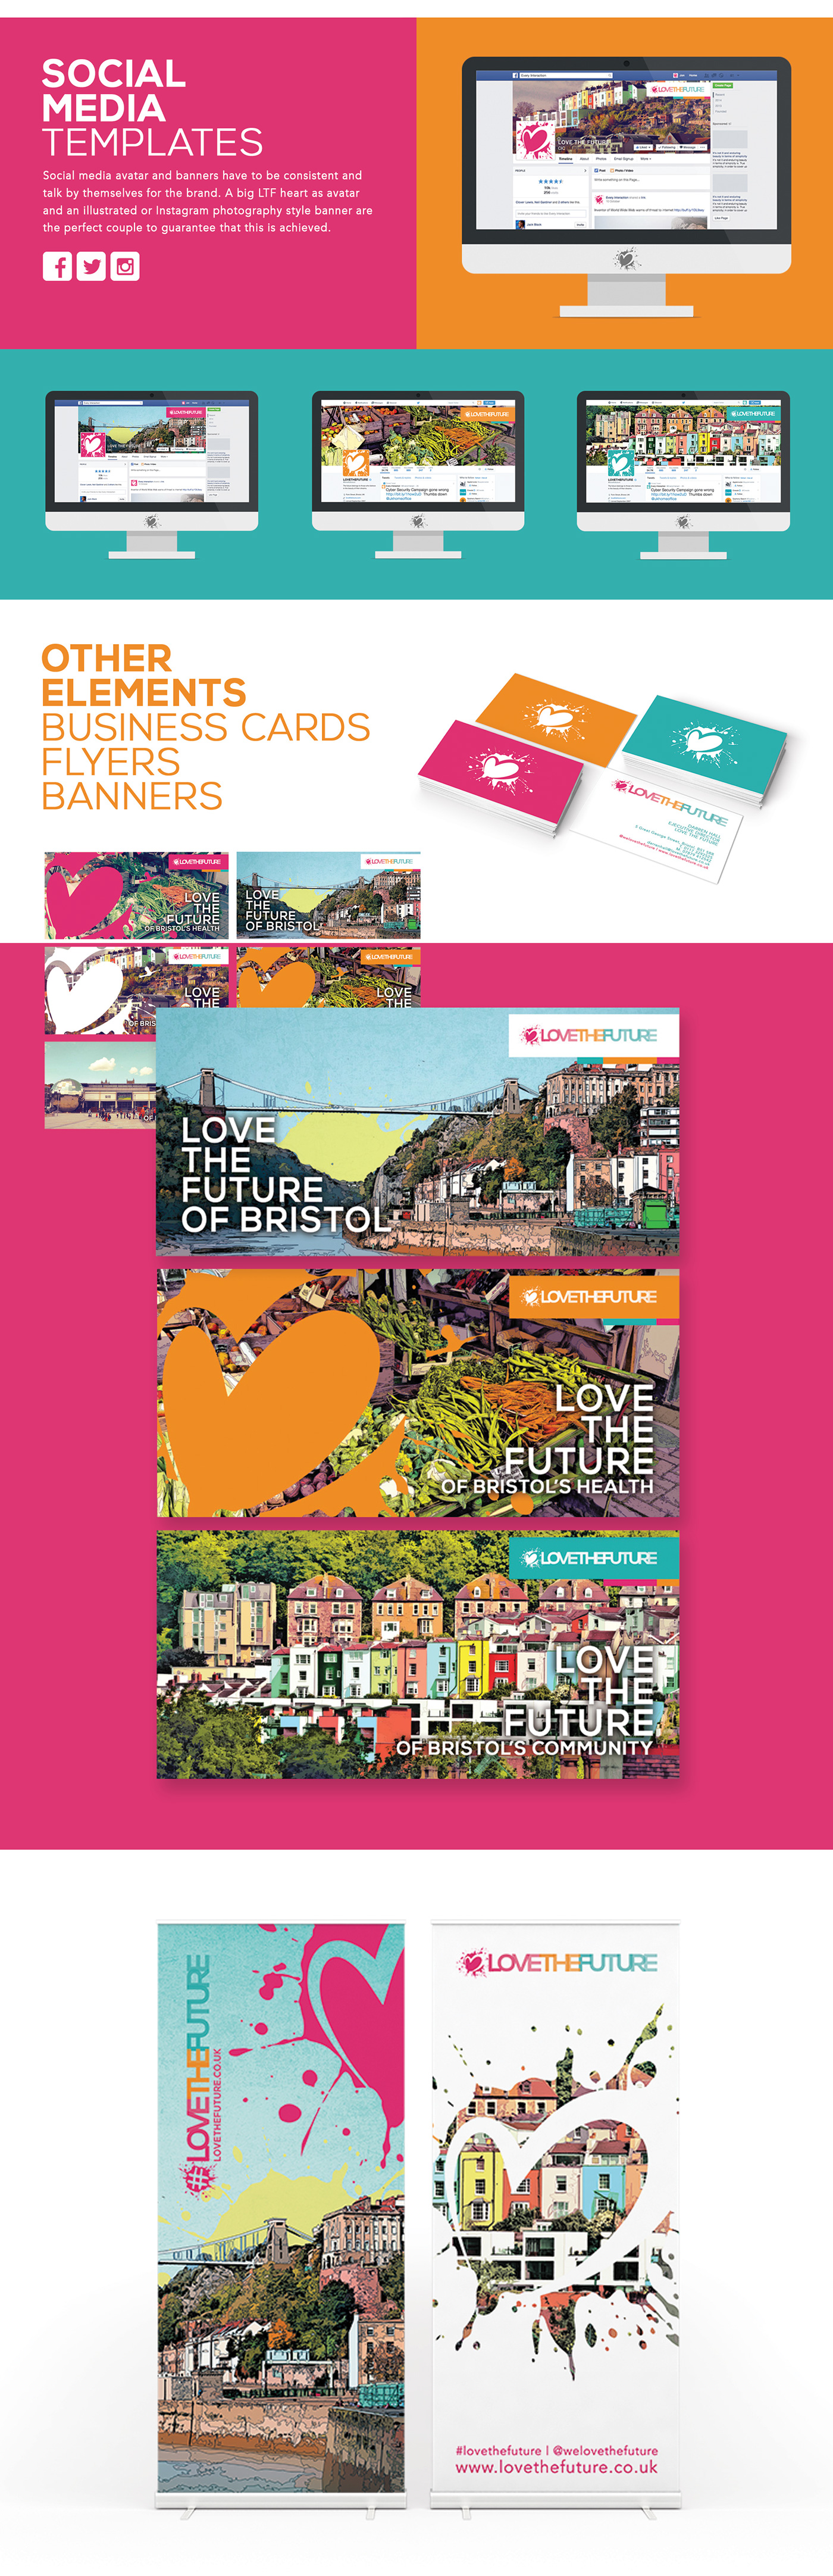 lovethefuture heart future green cic campaign identity Ecology wellbeing social Bristol poster logo media inspire